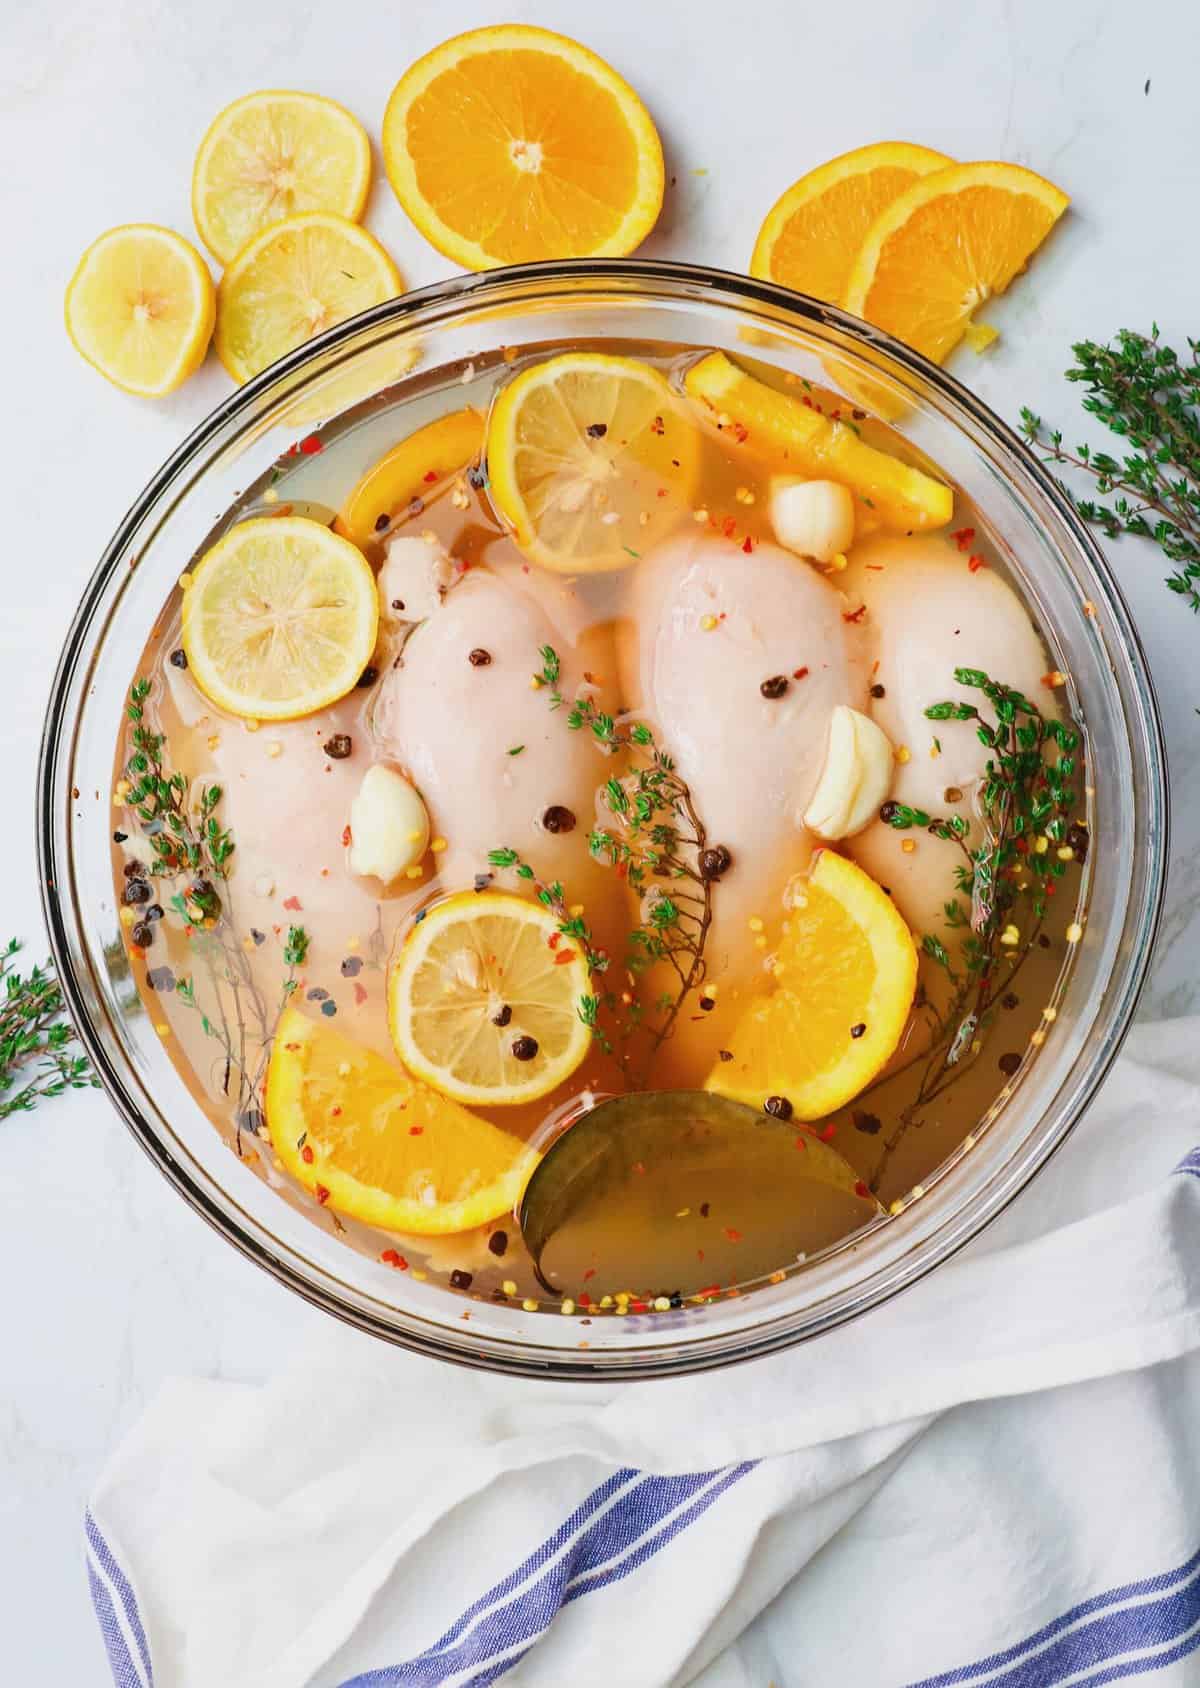 Brining chicken breast for grilling is super easy